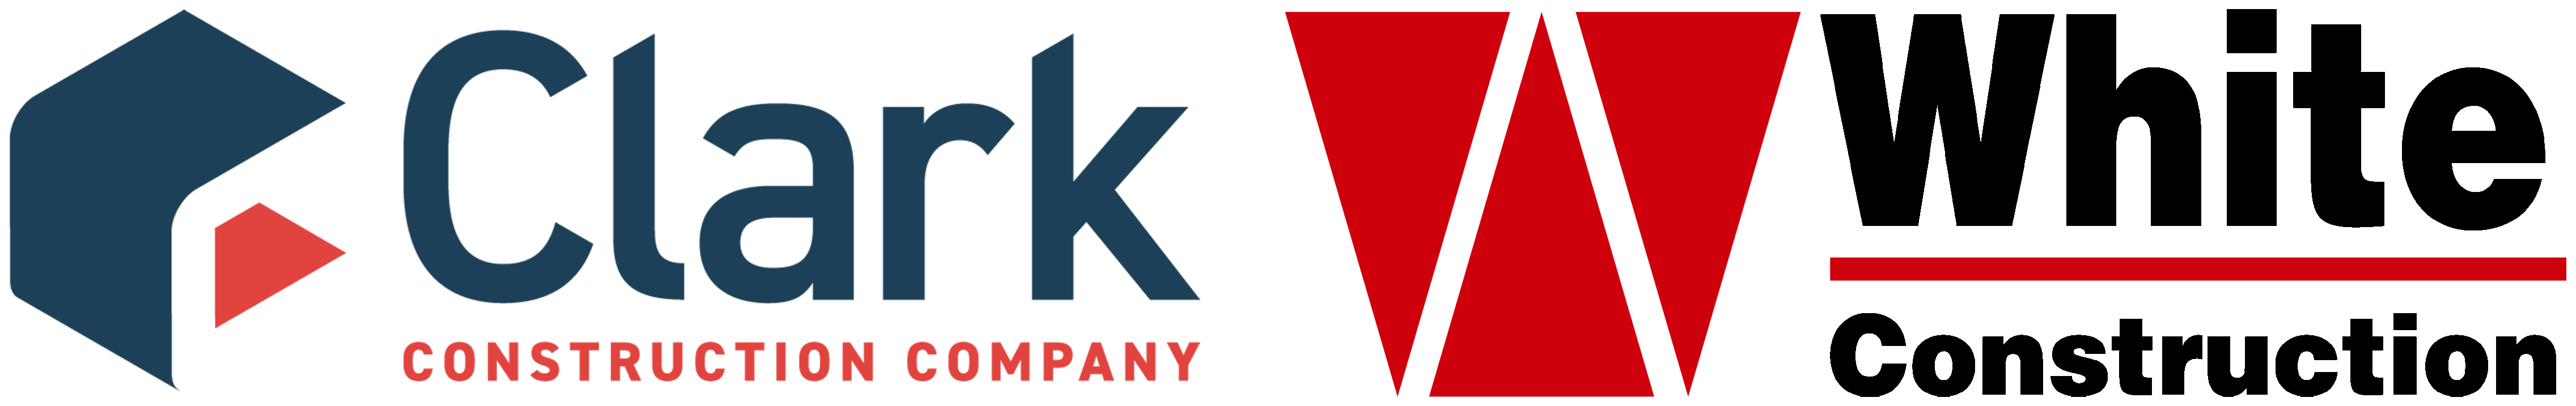 Clark and White Construction logos